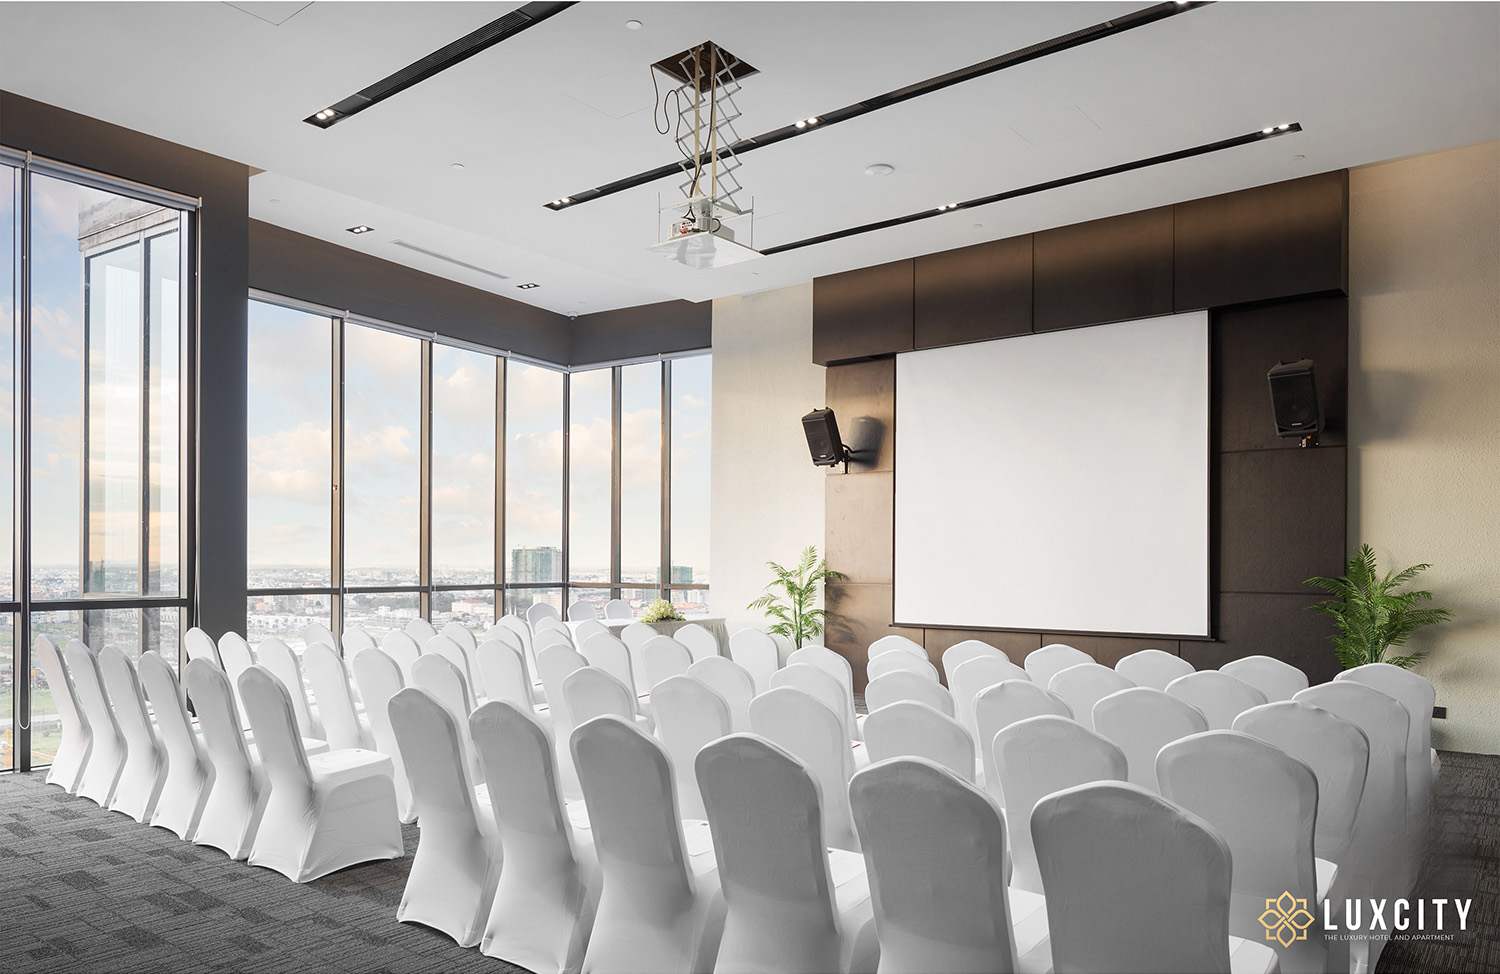 FUNCTION ROOM